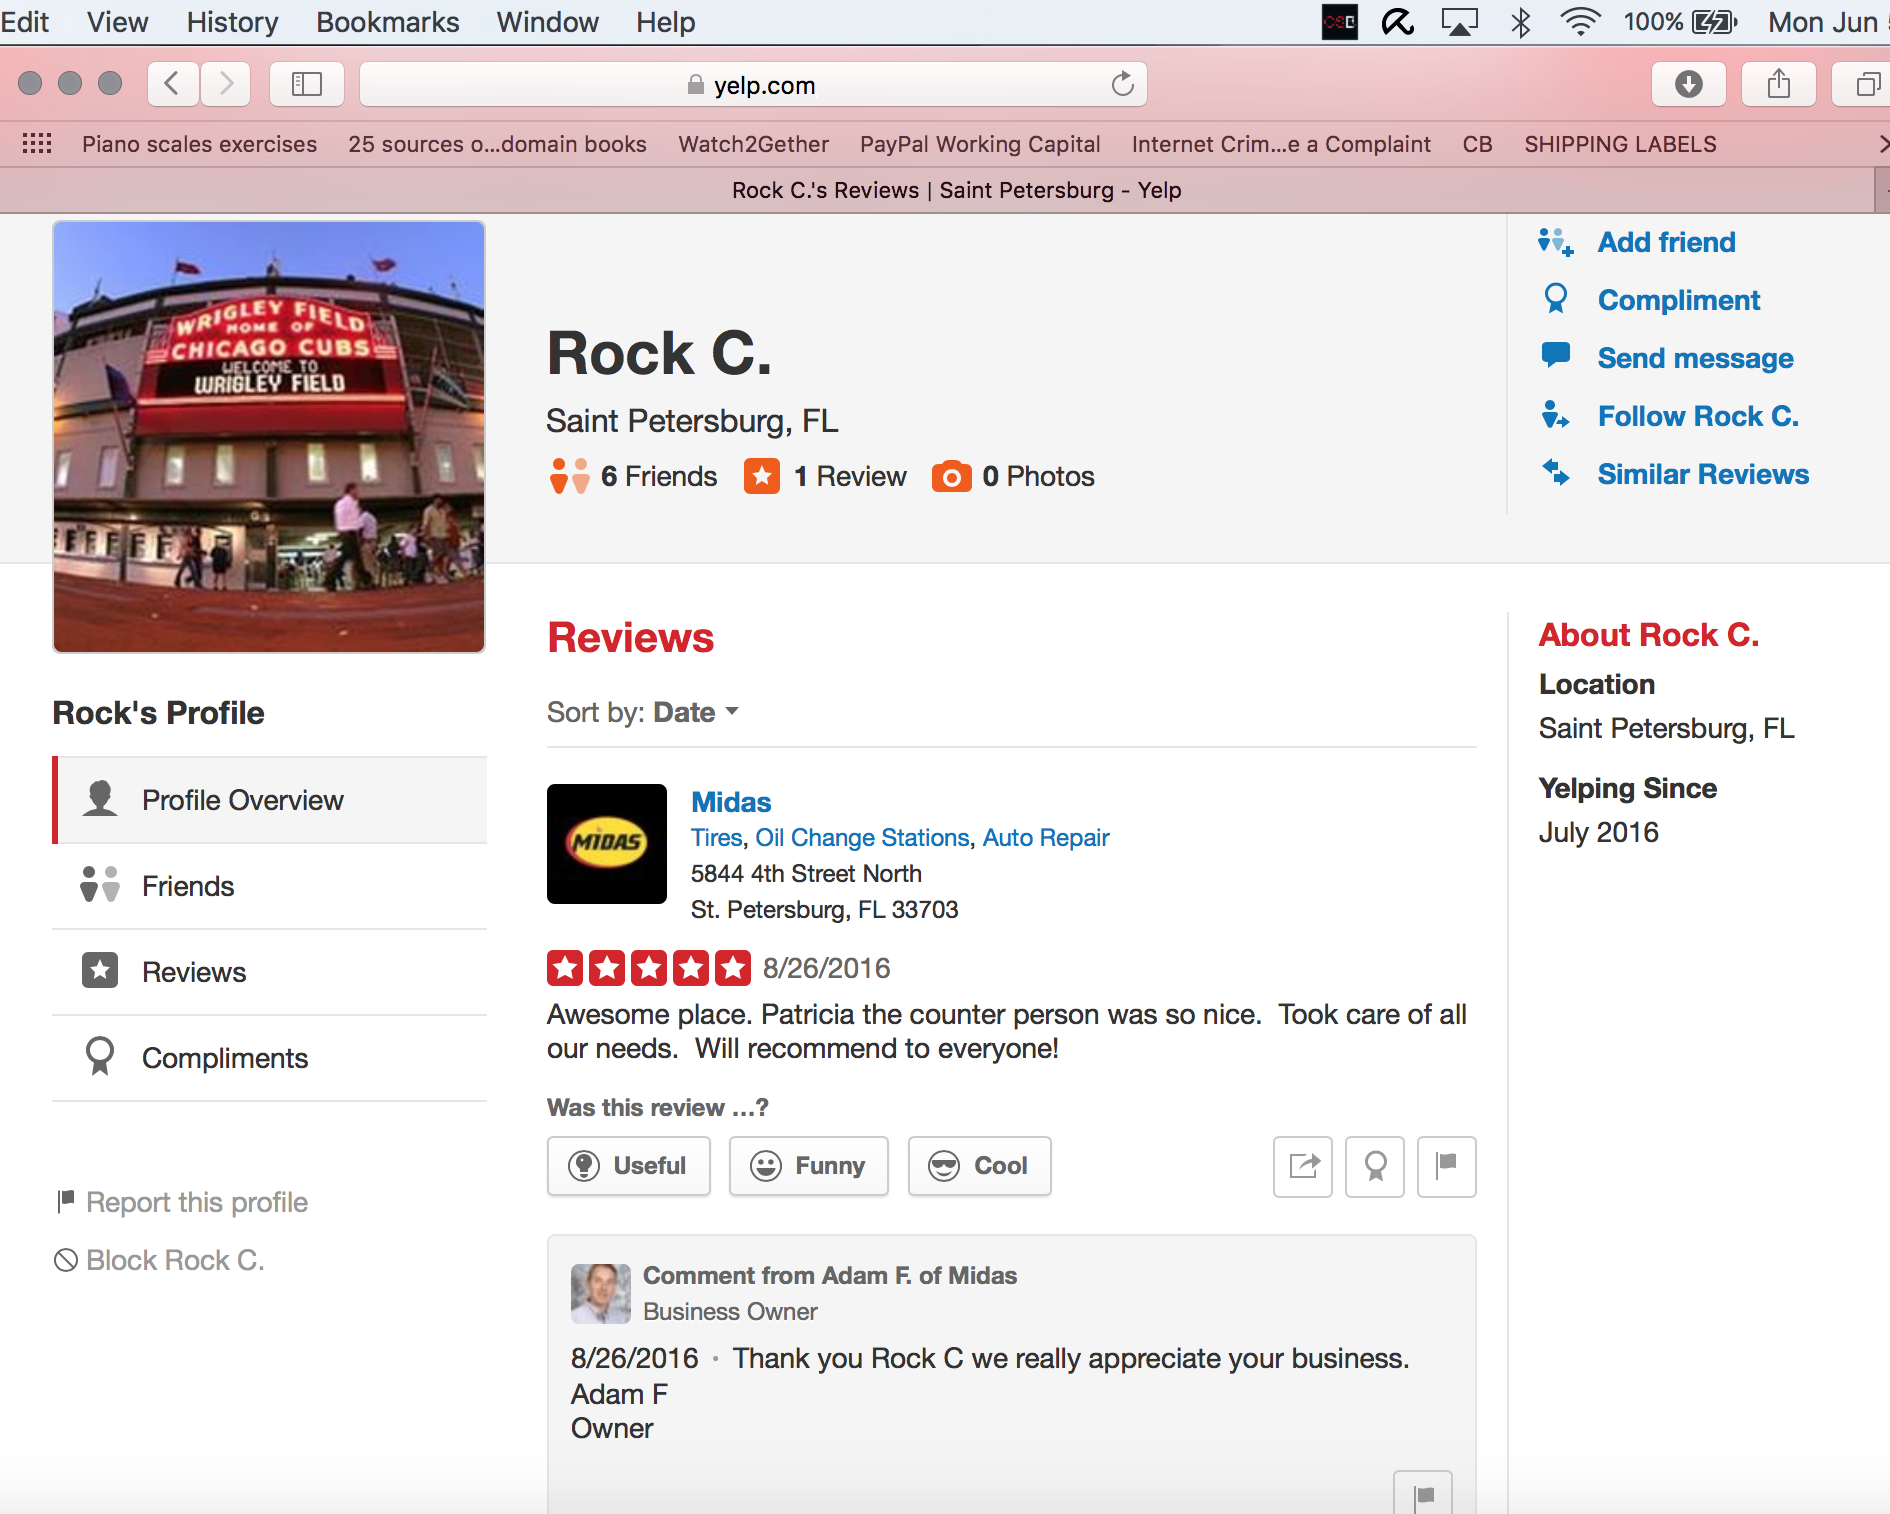 fake yelp review   from rock c  store manager to adam the owner 